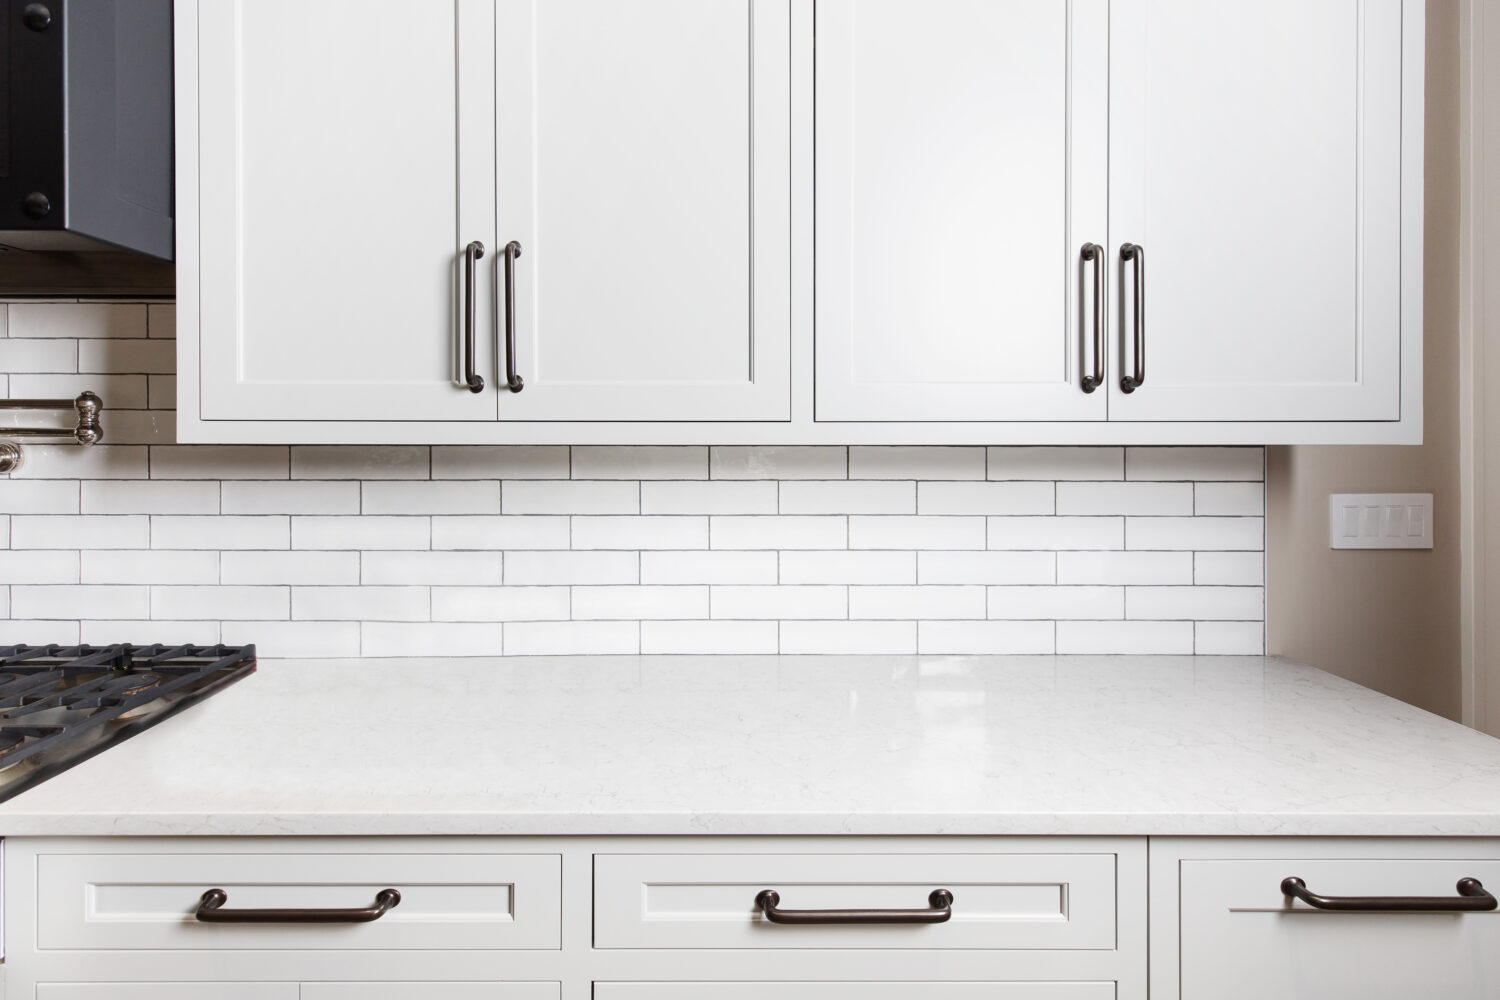 A close up view of thin shaker cabinets with a white painted finish, a white quartz countertop, and the simple white subway tile backsplash.